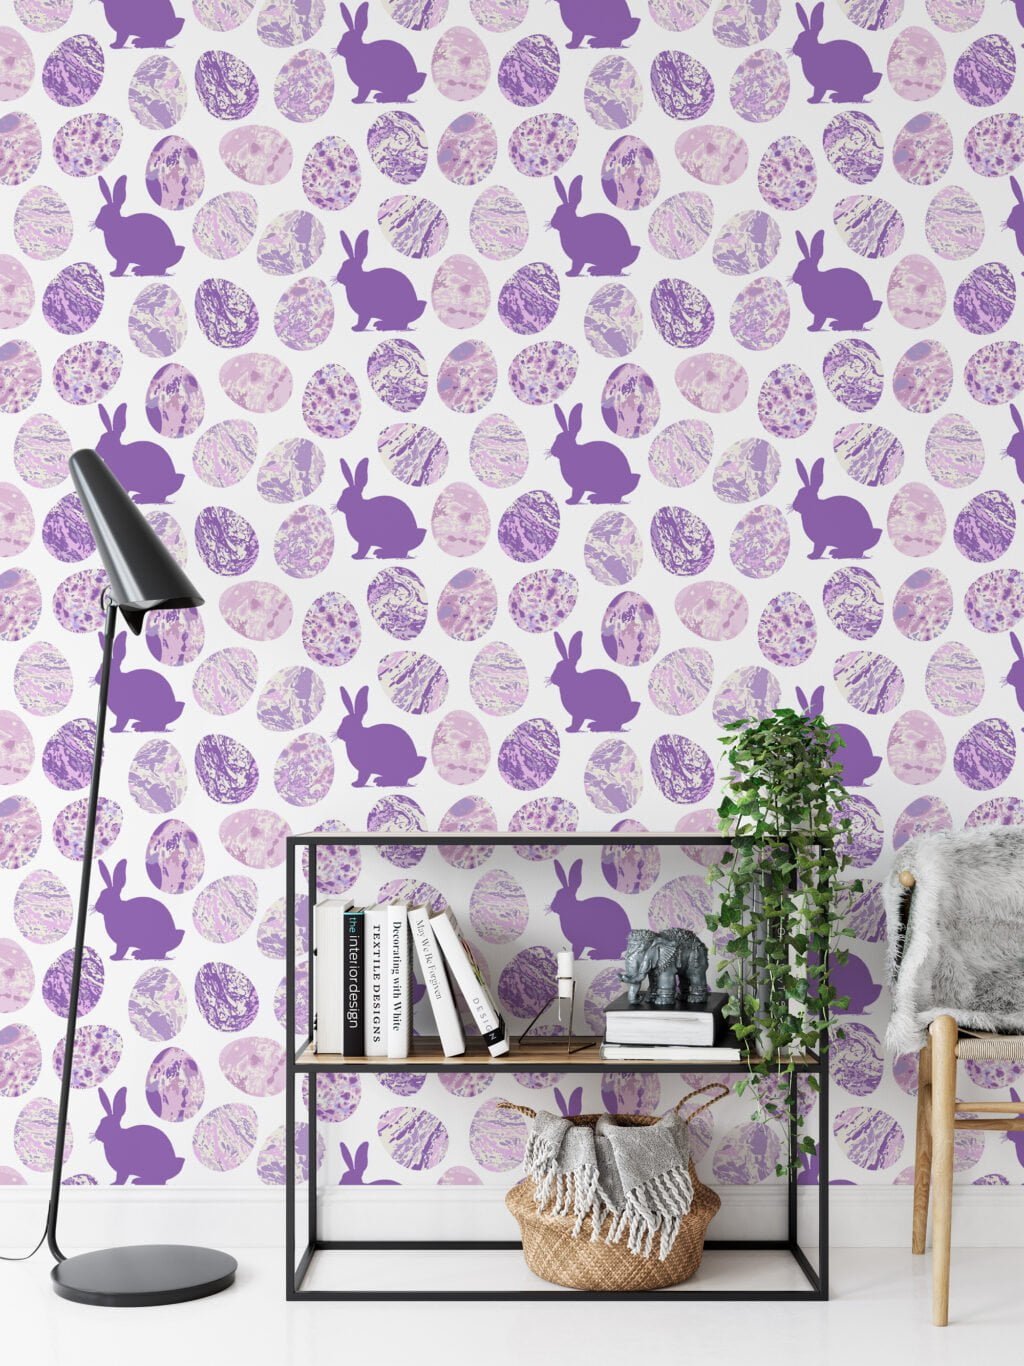 Purple Egg Shaped Ink Blotches With Bunnies Wallpaper, Charming Bunny & Egg Peel & Stick Wall Mural